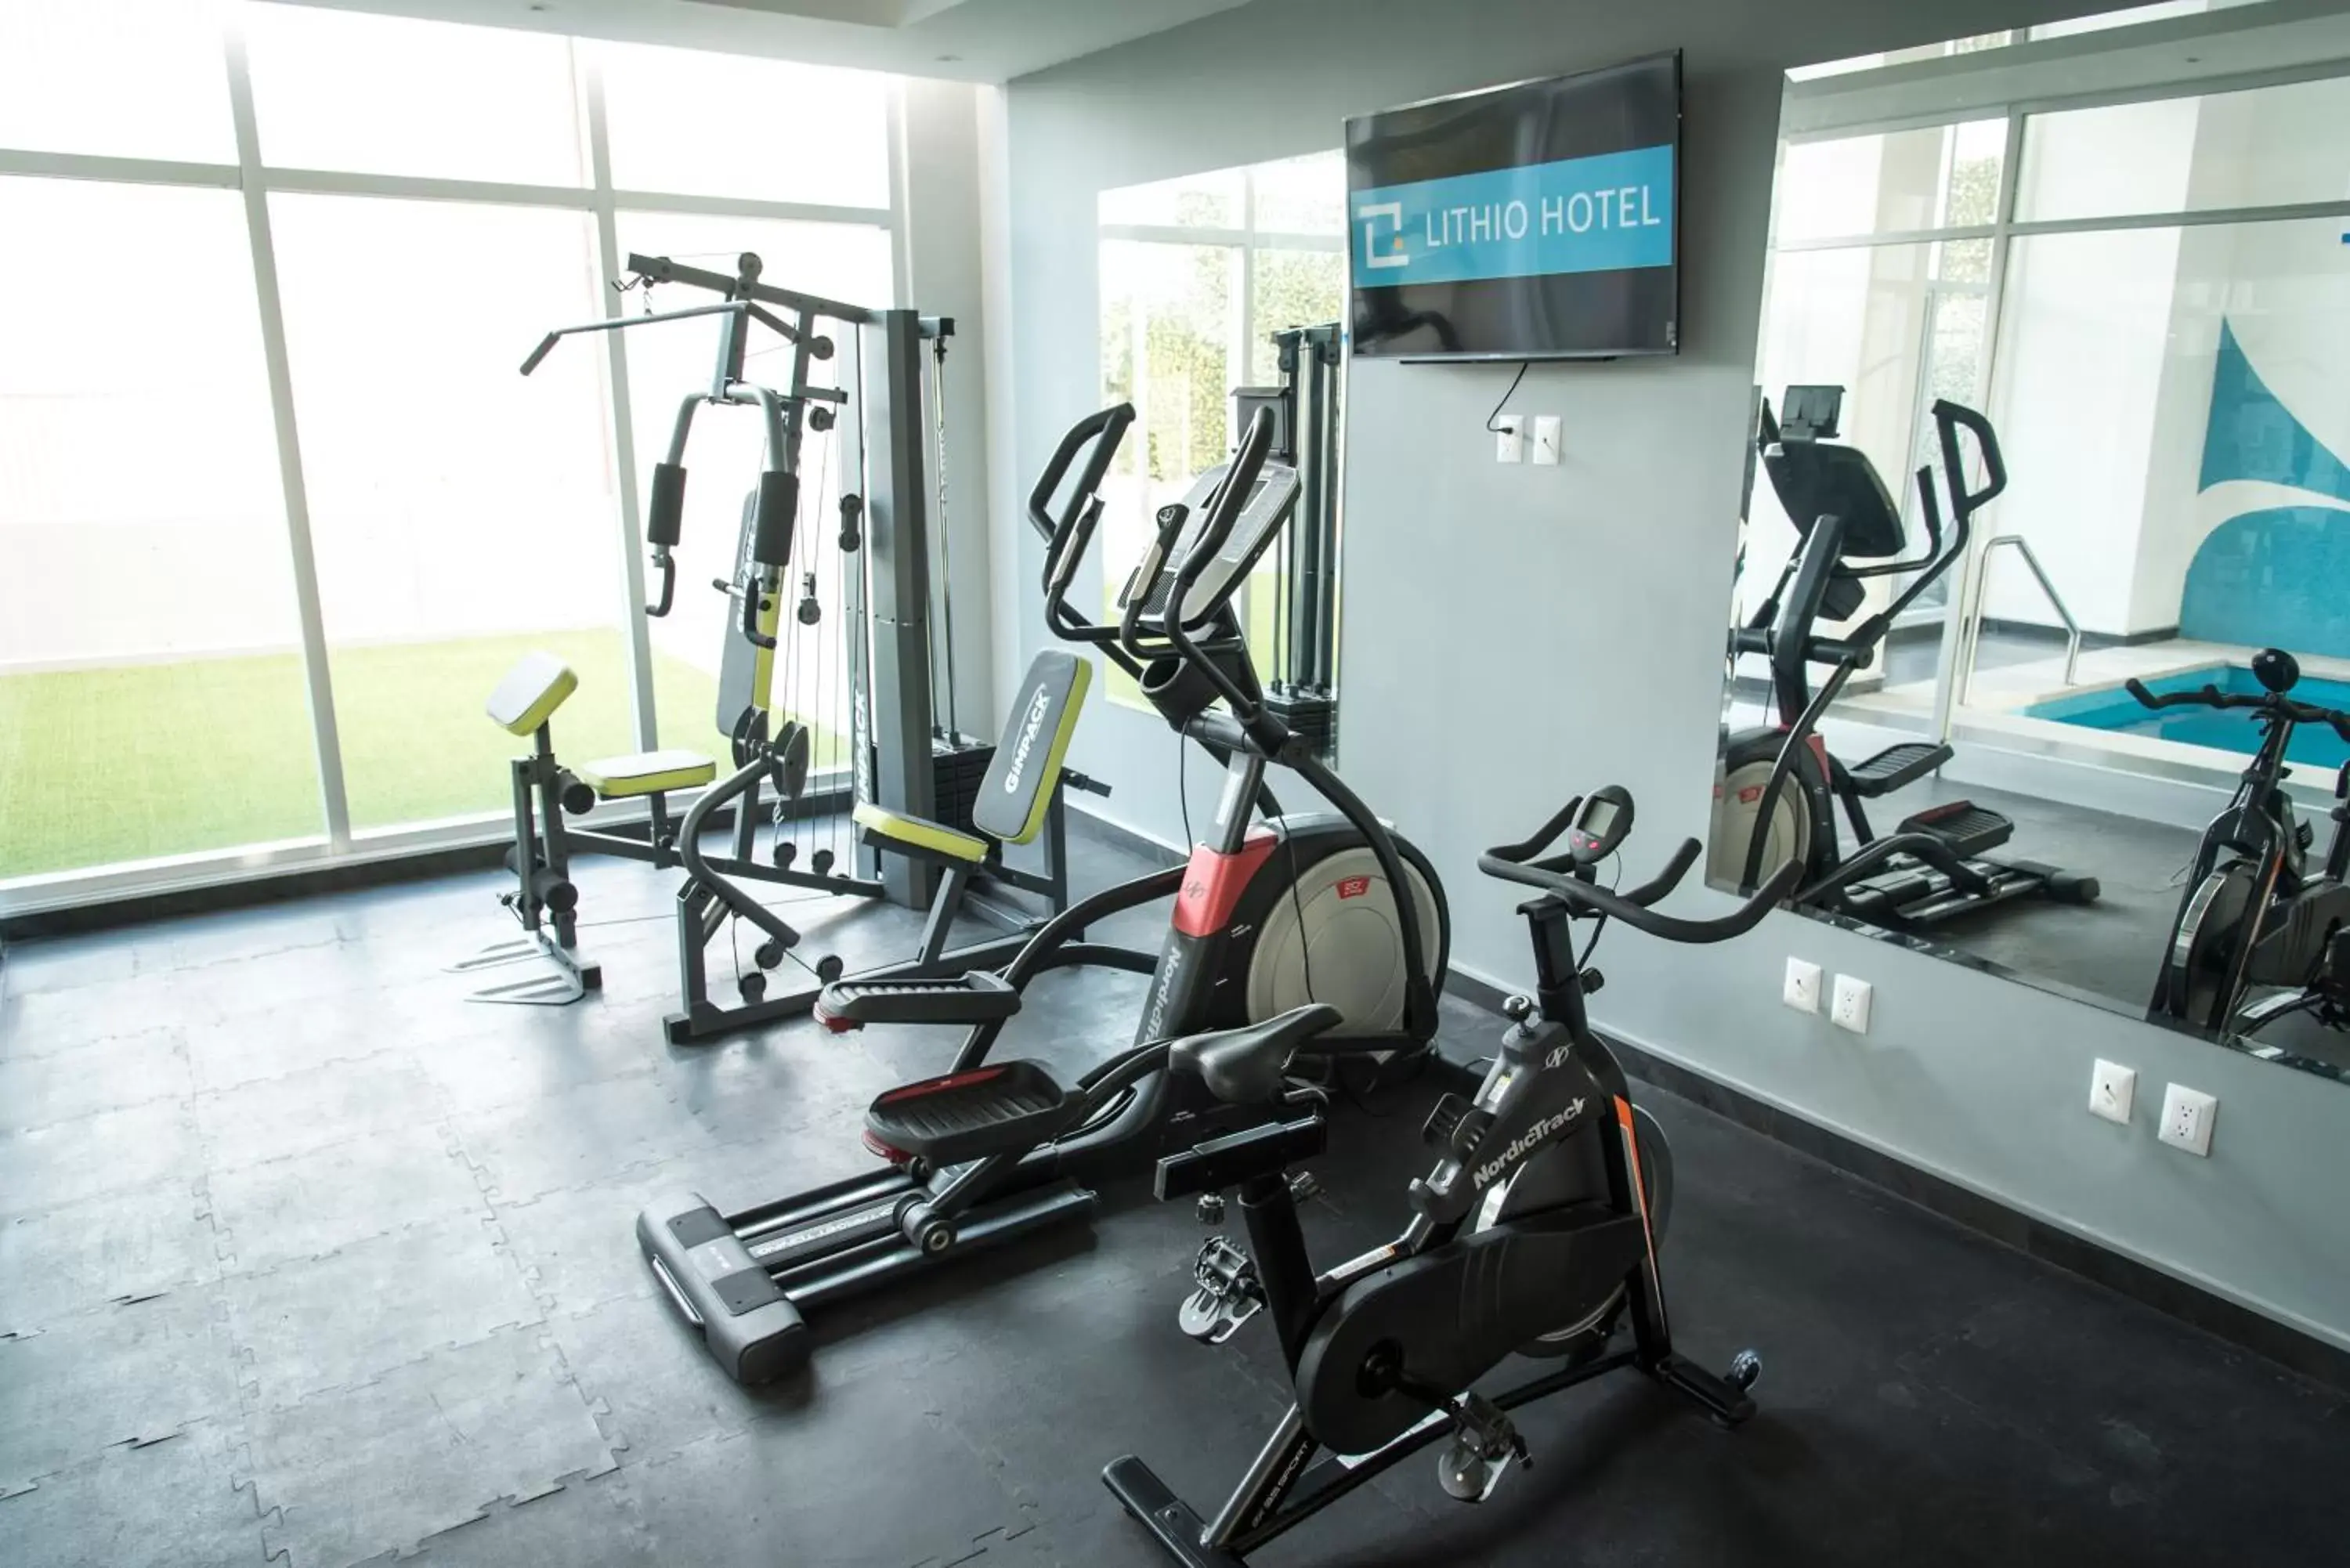 Fitness Center/Facilities in Lithio Hotel